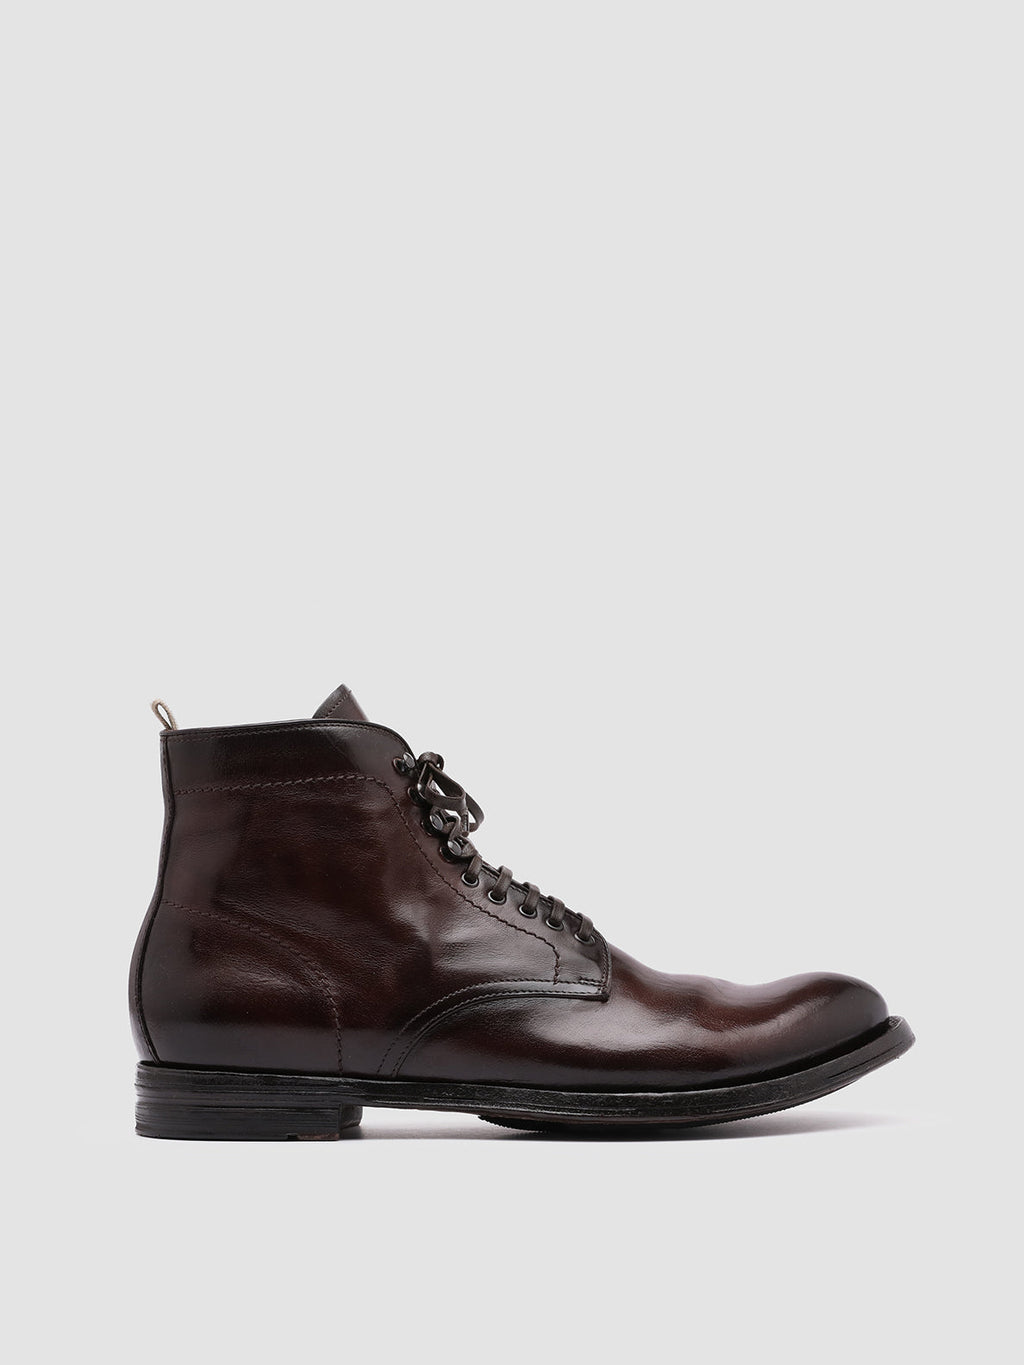 ANATOMIA 013 - Brown Leather Ankle Boots Men Officine Creative - 1